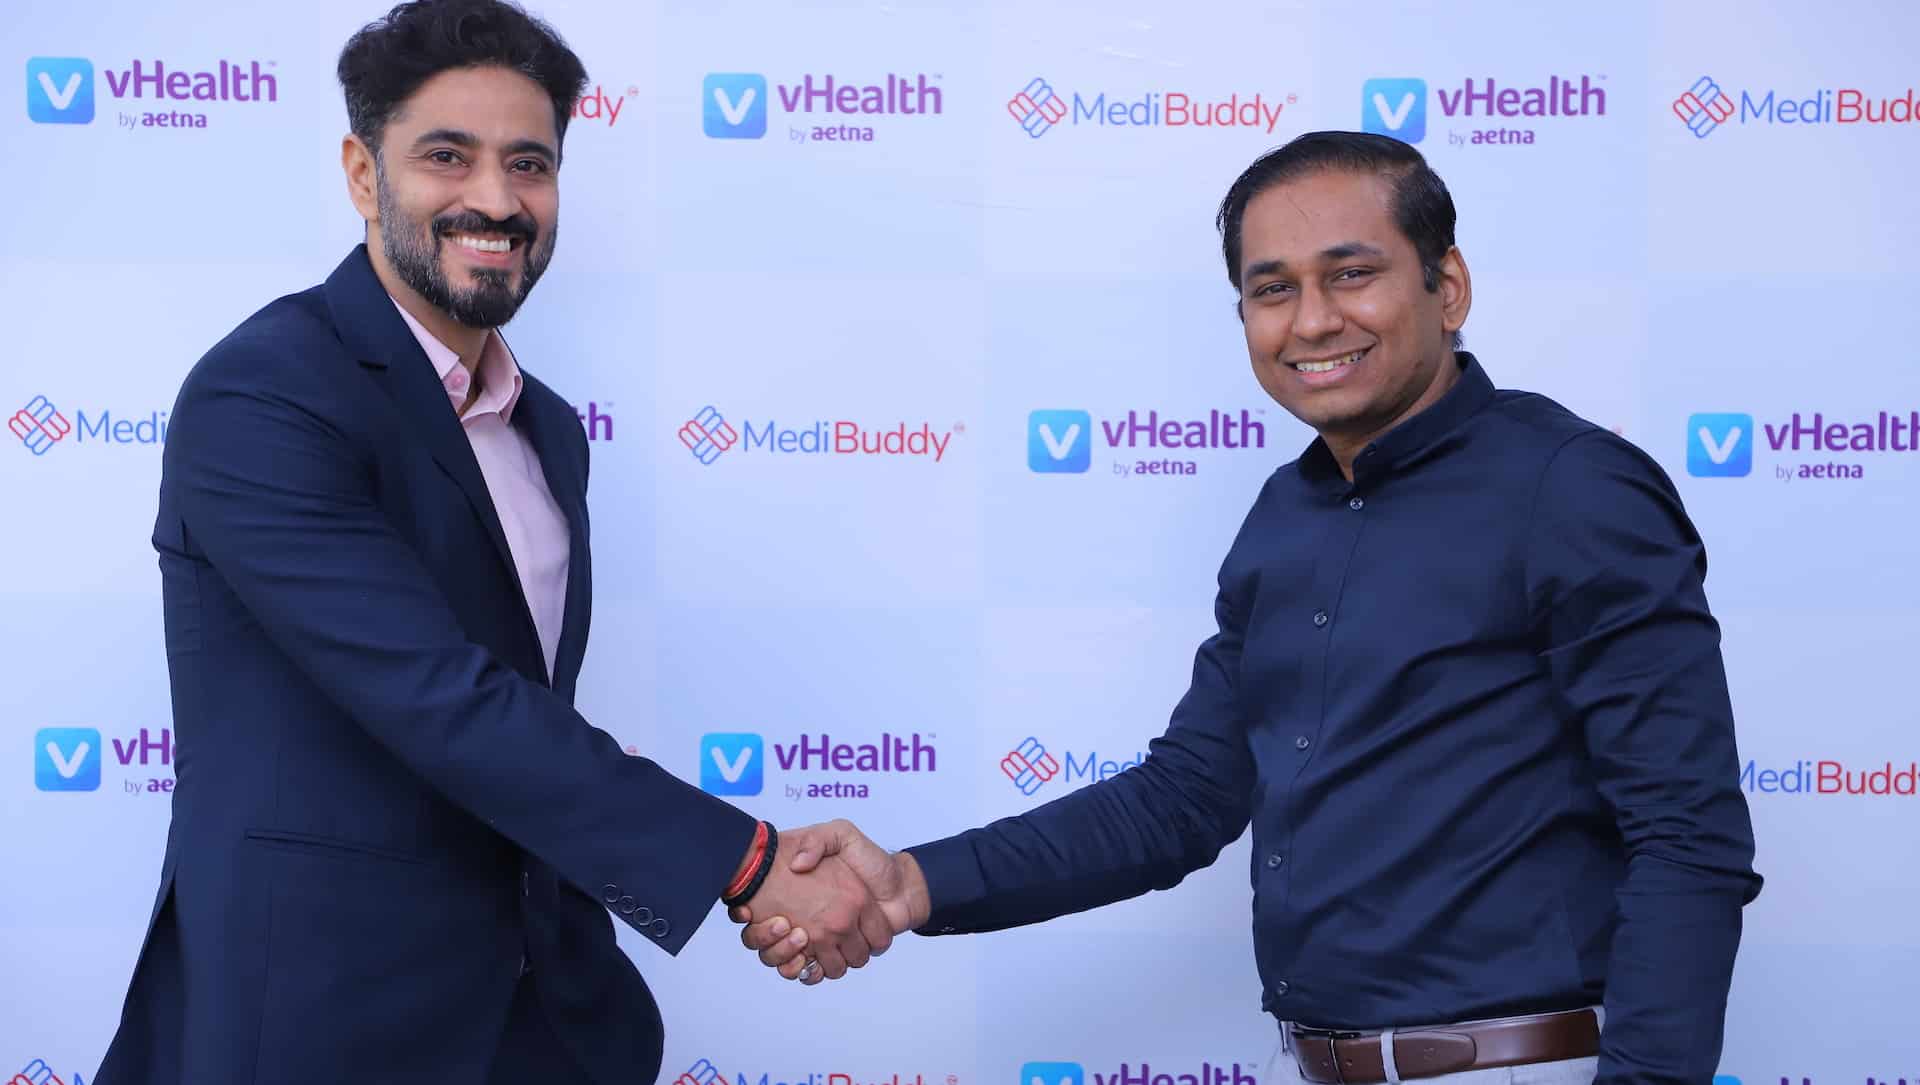 MediBuddy has acquired the ‘vHealth by Aetna’